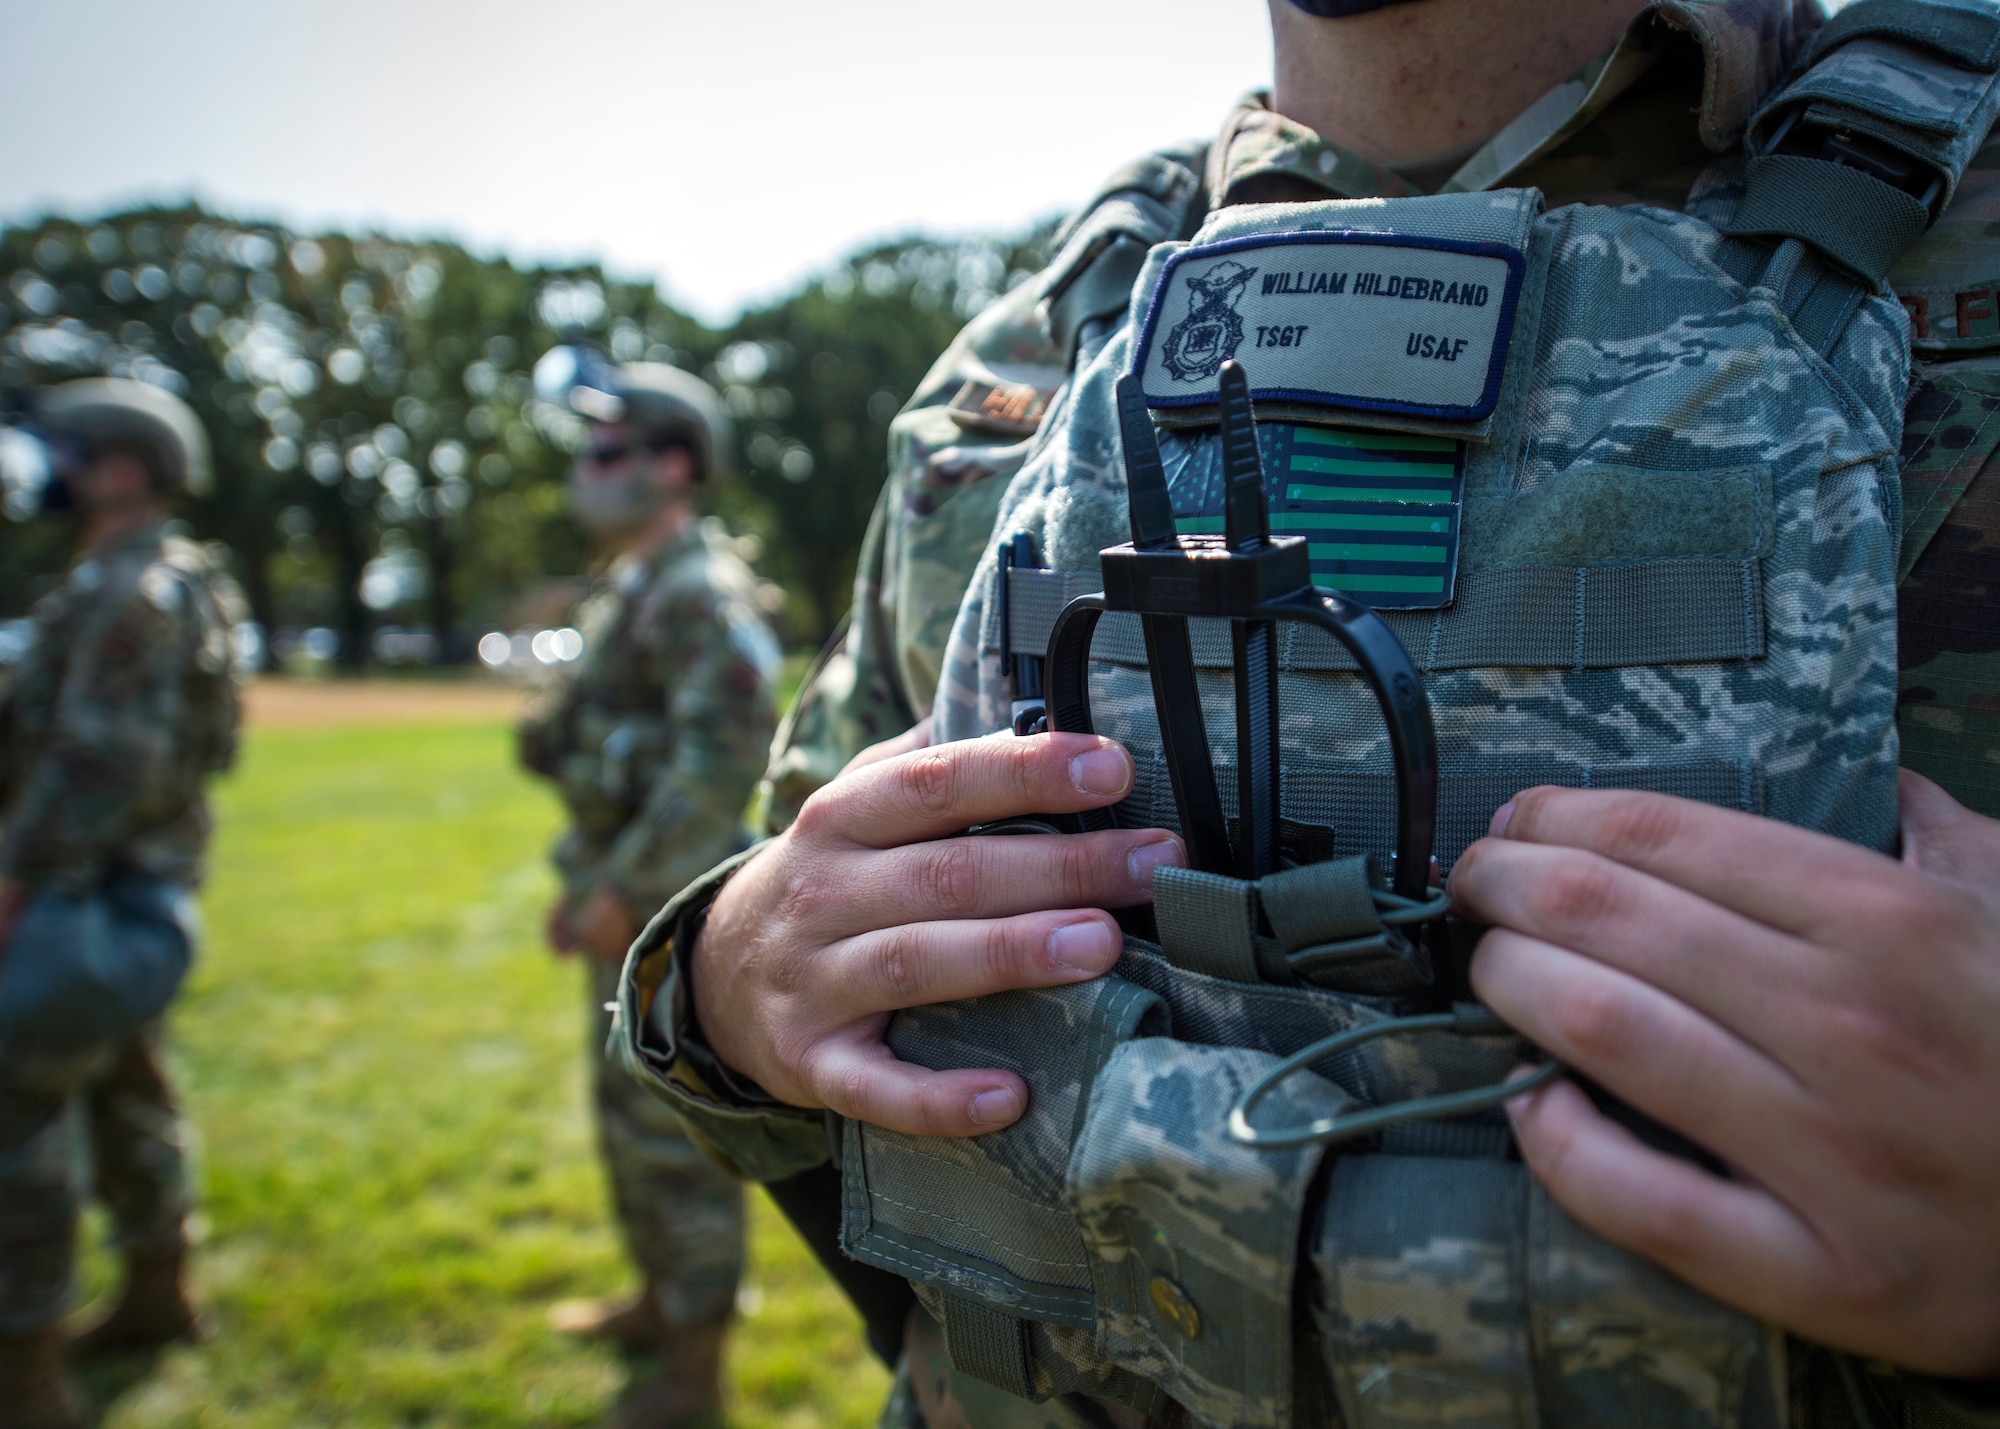 U.S. Air Force Airmen from the 133rd Airlift Wing participate in civil disturbance control training strengthening partnerships between local law enforcement and the Minnesota Air National Guard in St. Paul, Minn., Sept. 19, 2020.